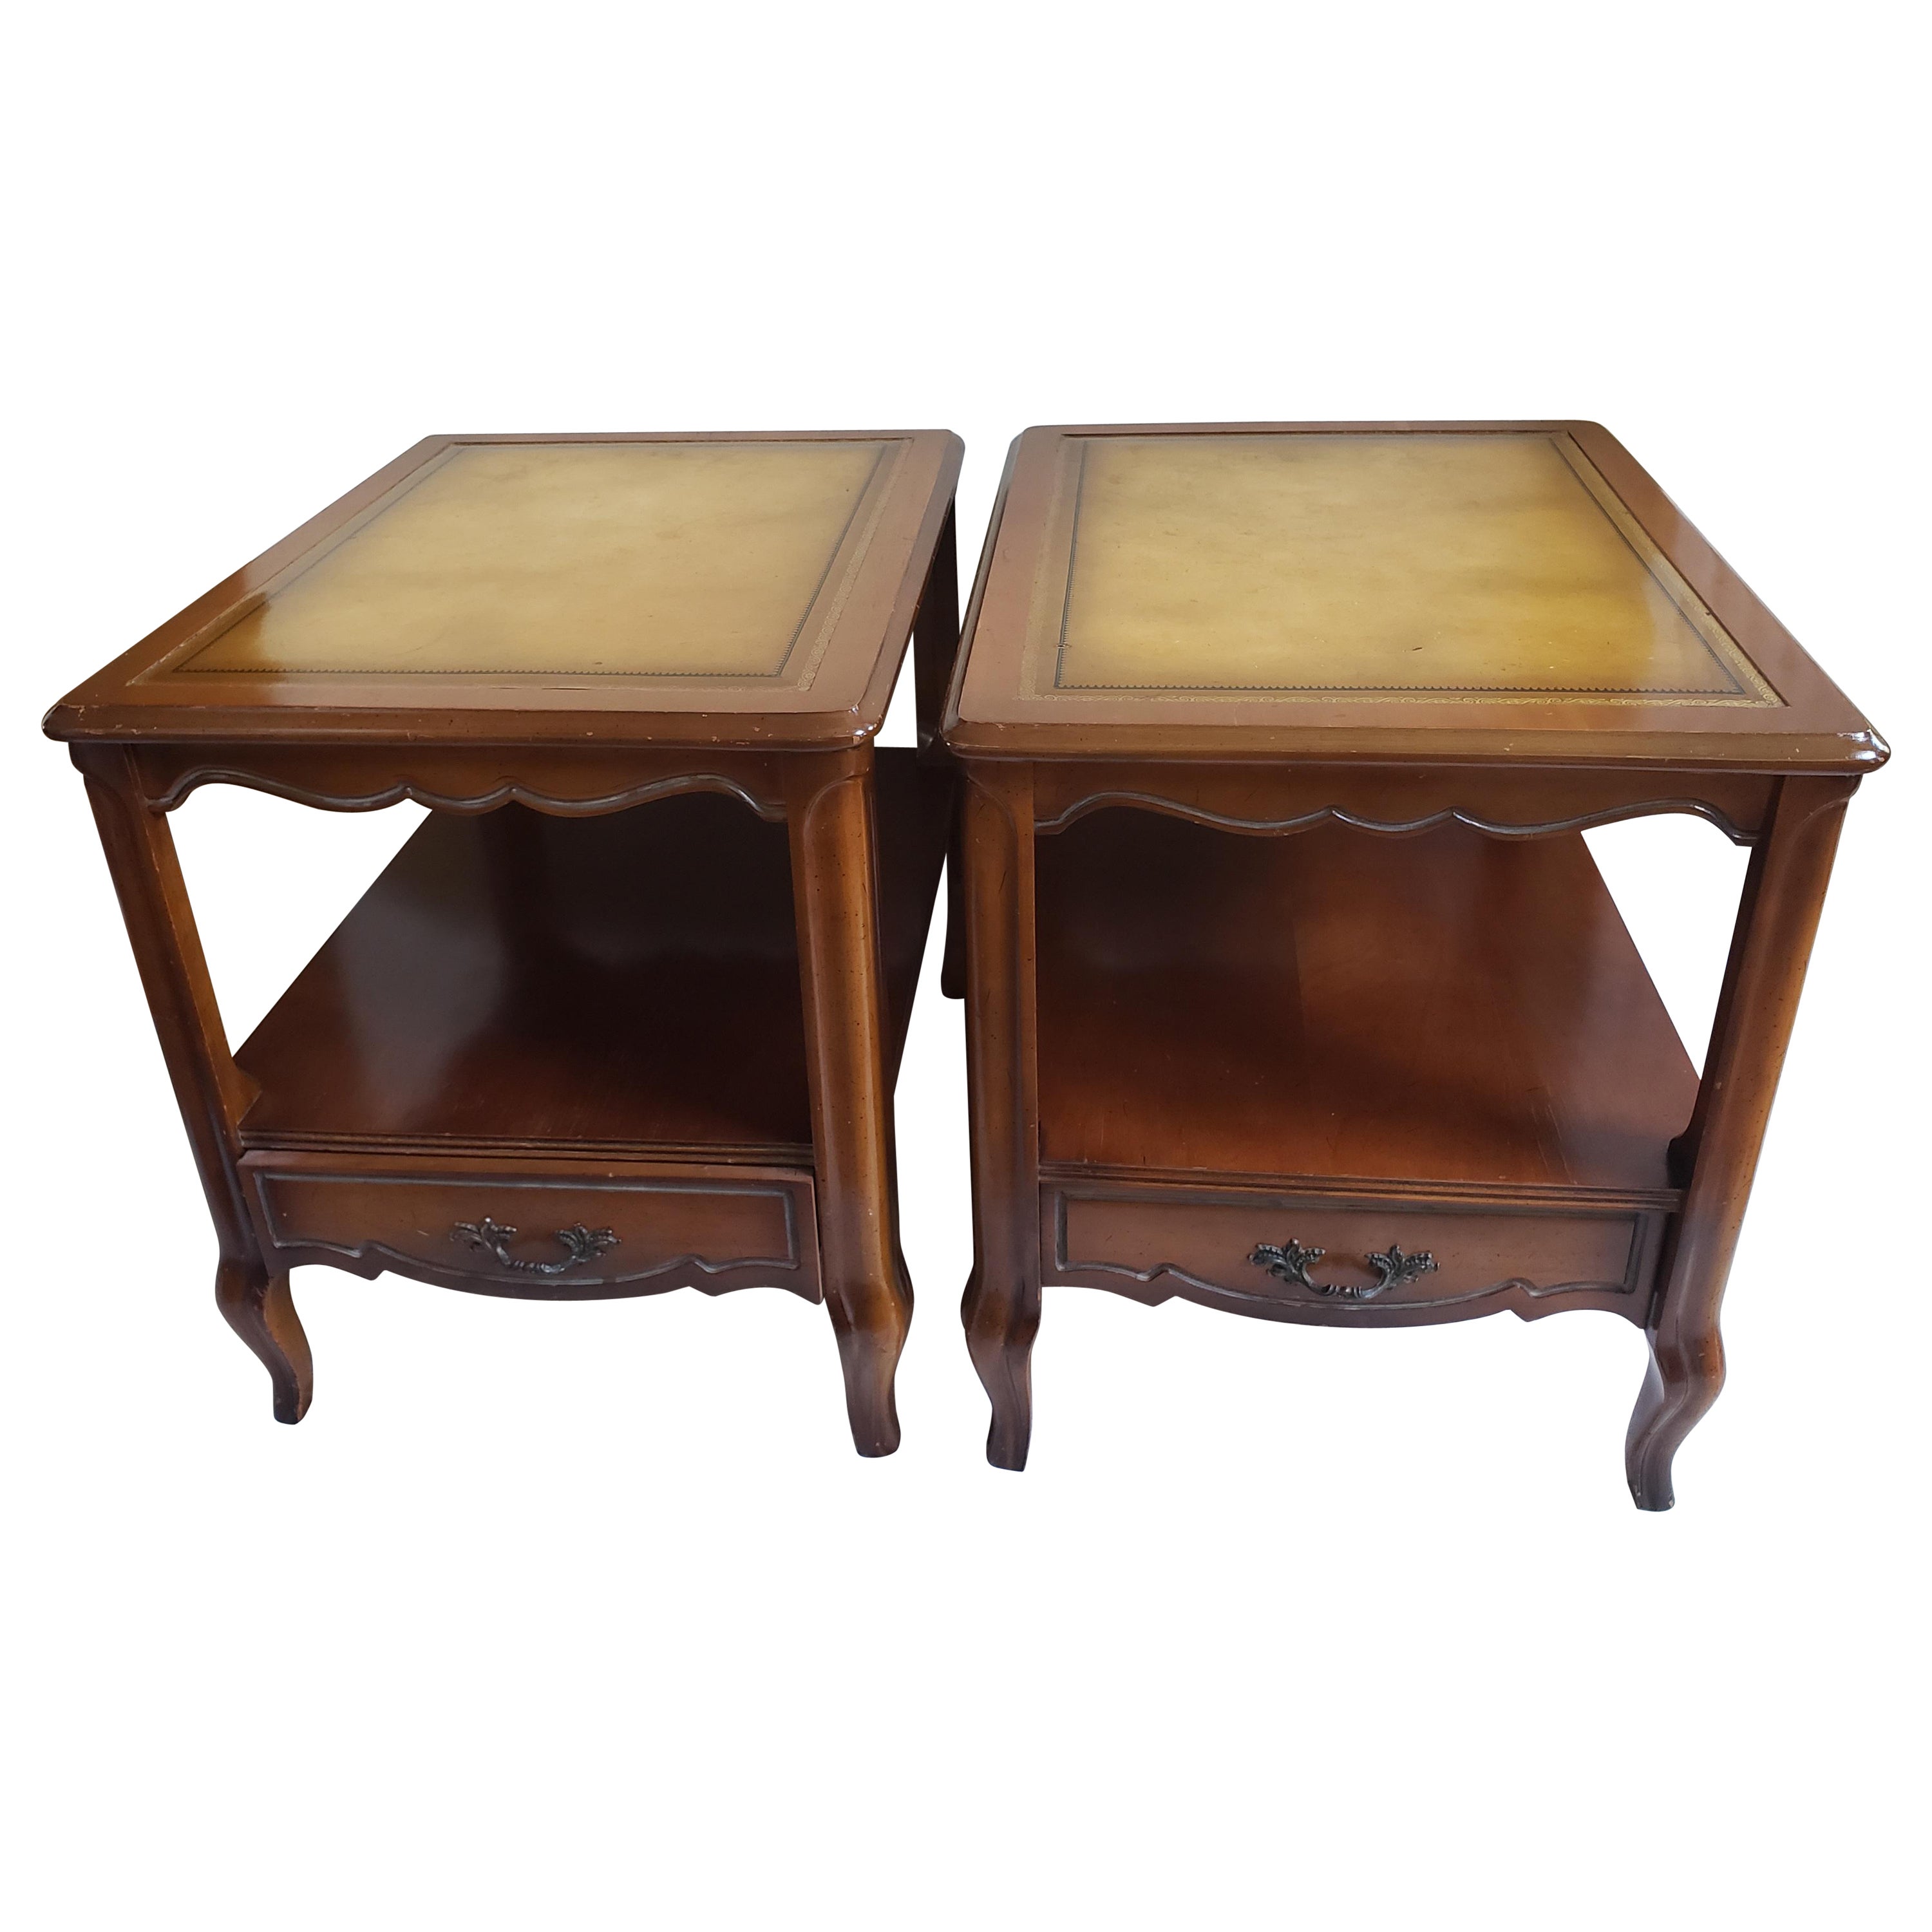 1960s French Provincial Side Tables with Leather and Stinciling Top, a Pair